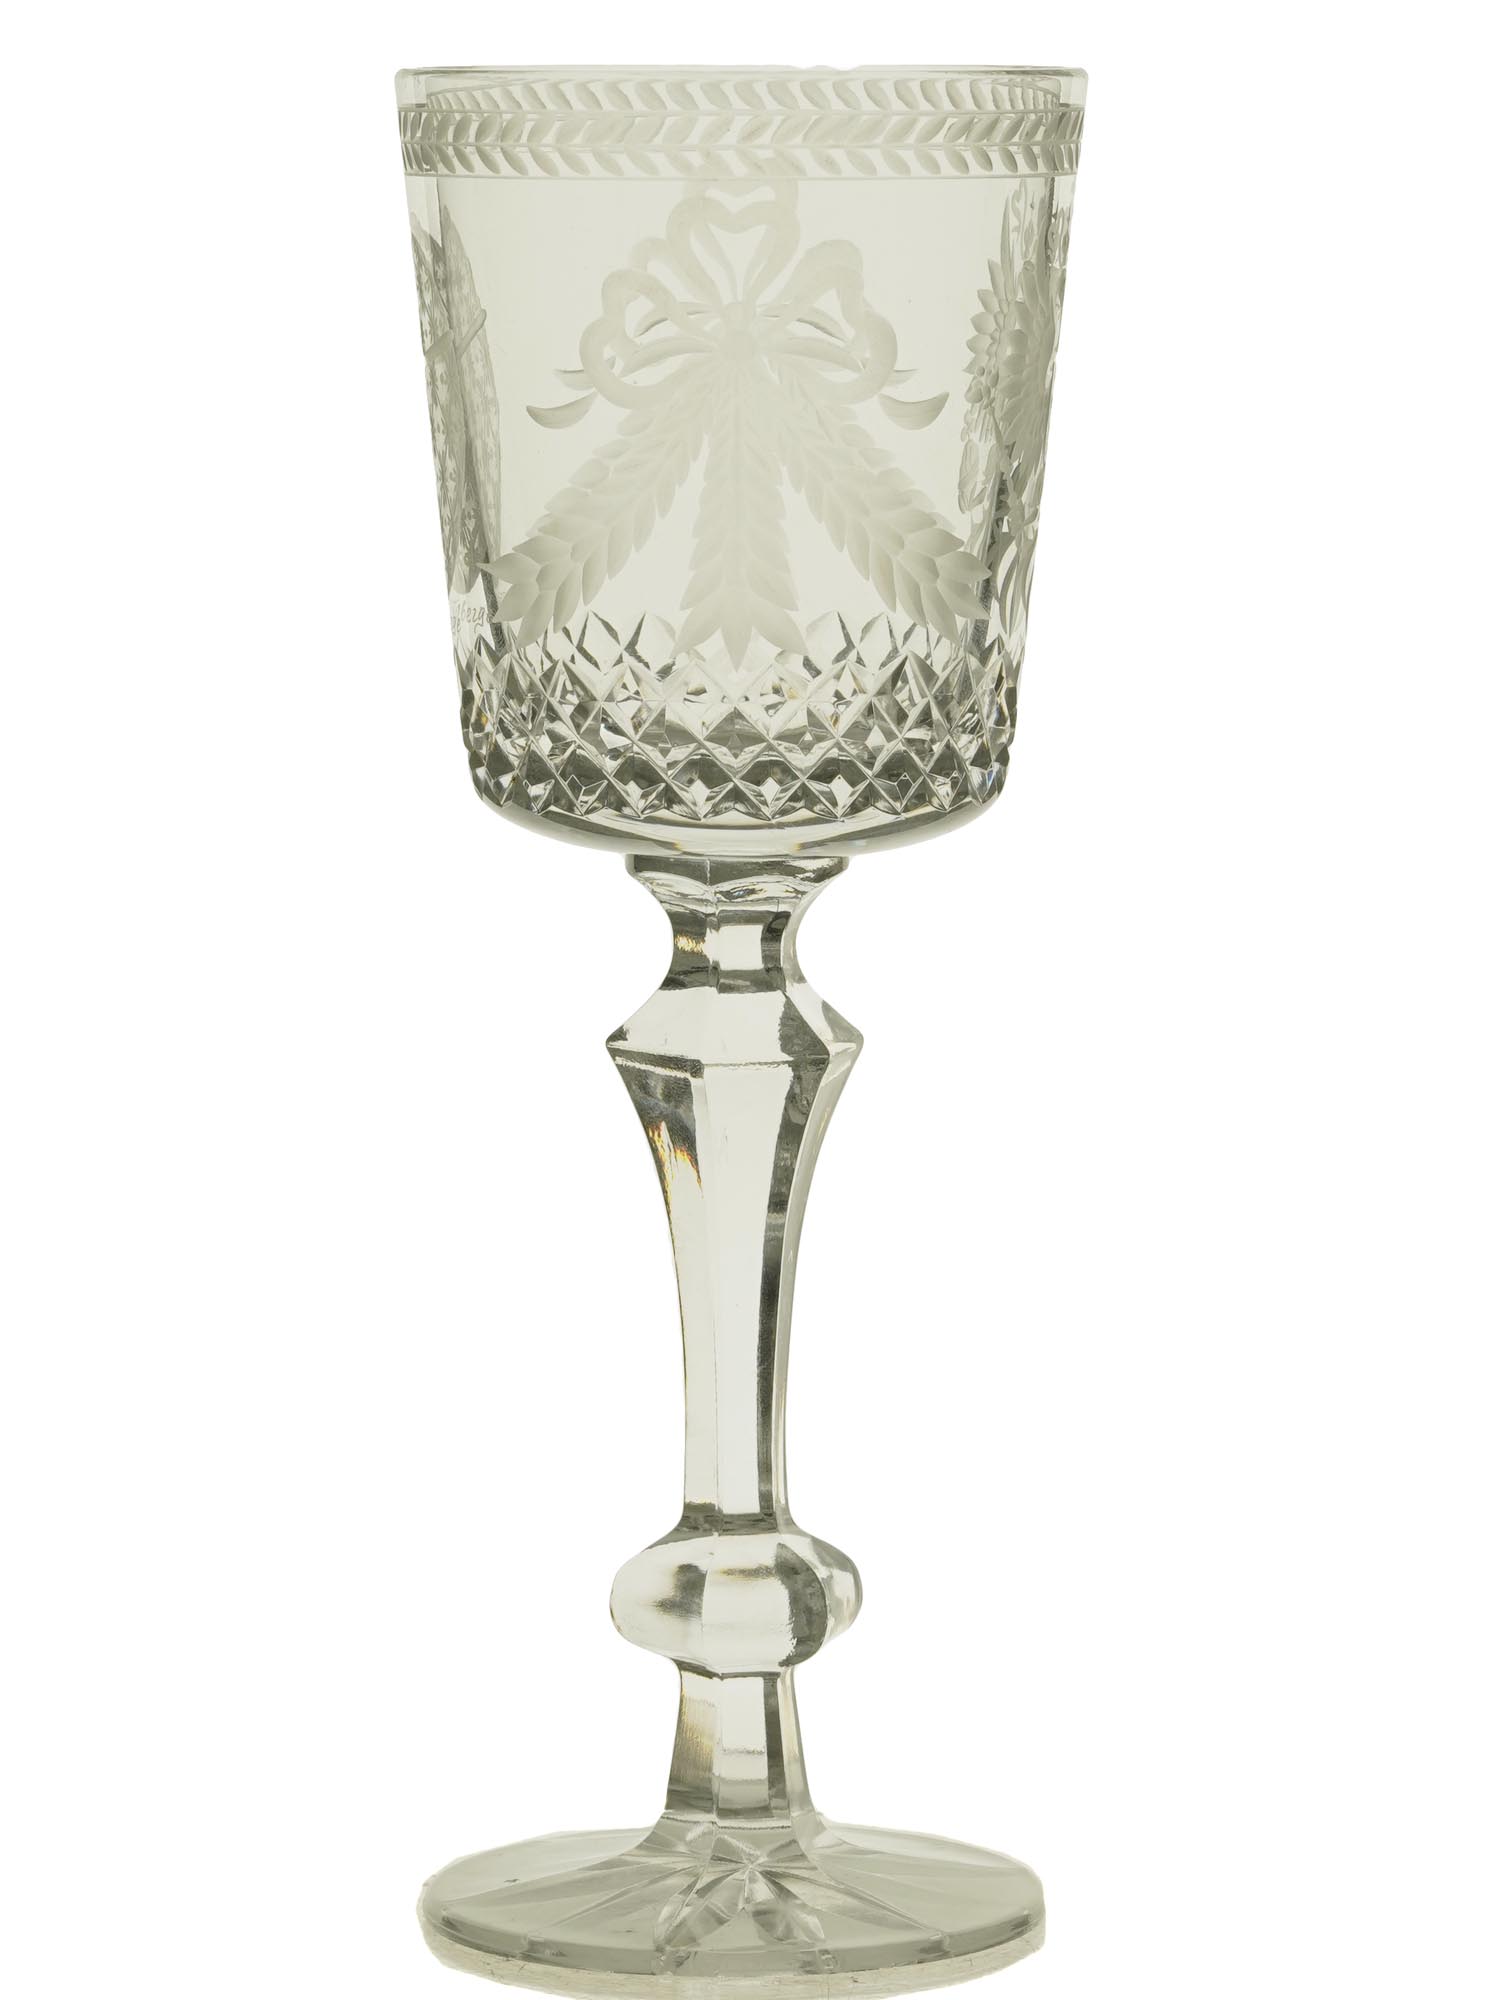 RUSSIAN IMPERIAL ETCHED AND CUT GLASS WINE GOBLET PIC-1